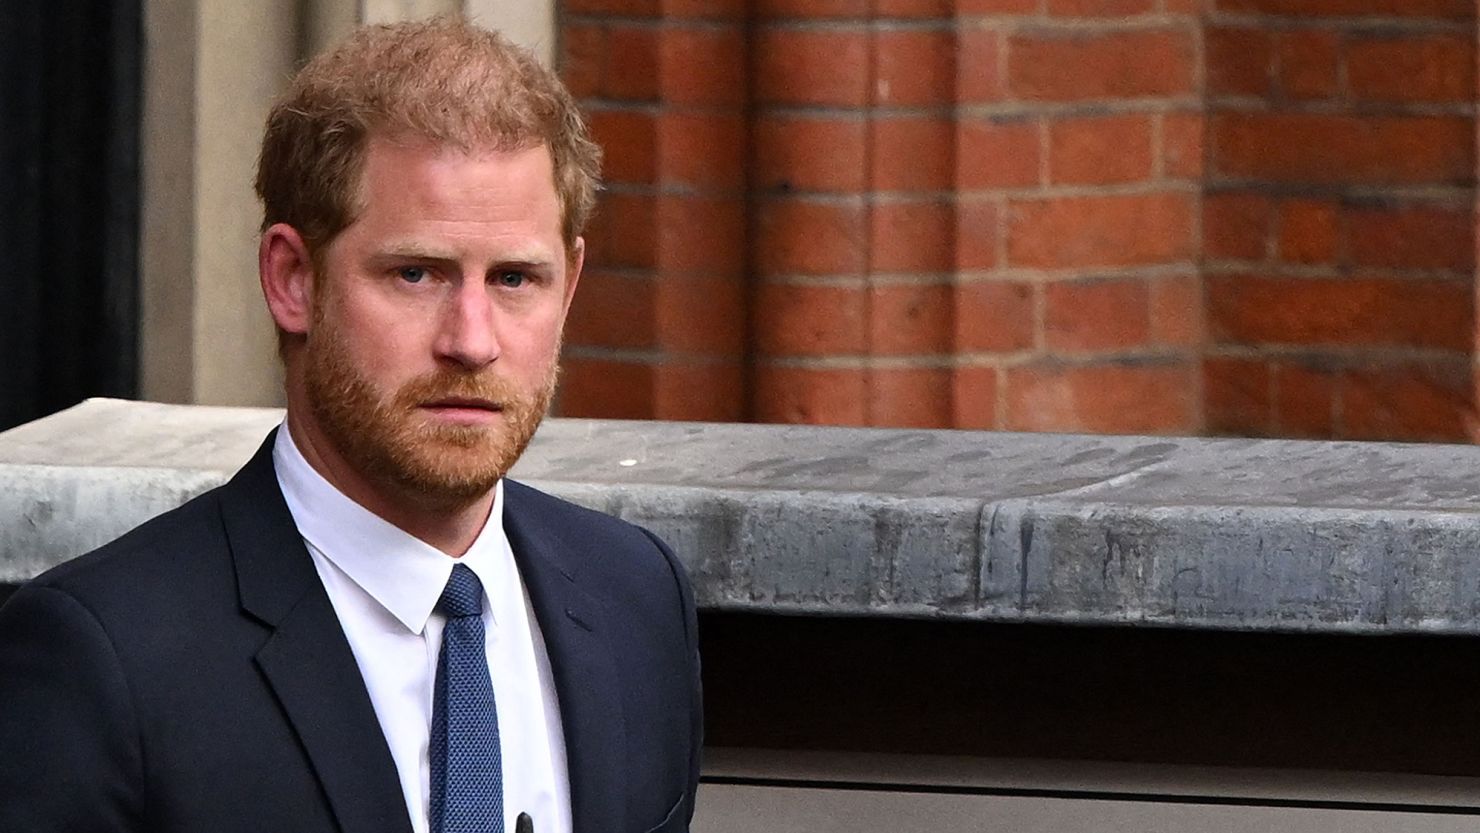 Britain's Prince Harry, Duke of Sussex leaves from the Royal Courts of Justice, Britain's High Court, in central London on March 27, 2023. - Prince Harry and pop superstar Elton John appeared at a London court Monday, delivering a high-profile jolt to a privacy claim launched by celebrities and other figures against a newspaper publisher. The publisher of the Daily Mail, Associated Newspapers (ANL), is trying to end the high court claims brought over alleged unlawful activity at its titles. (Photo by JUSTIN TALLIS / AFP) (Photo by JUSTIN TALLIS/AFP via Getty Images)